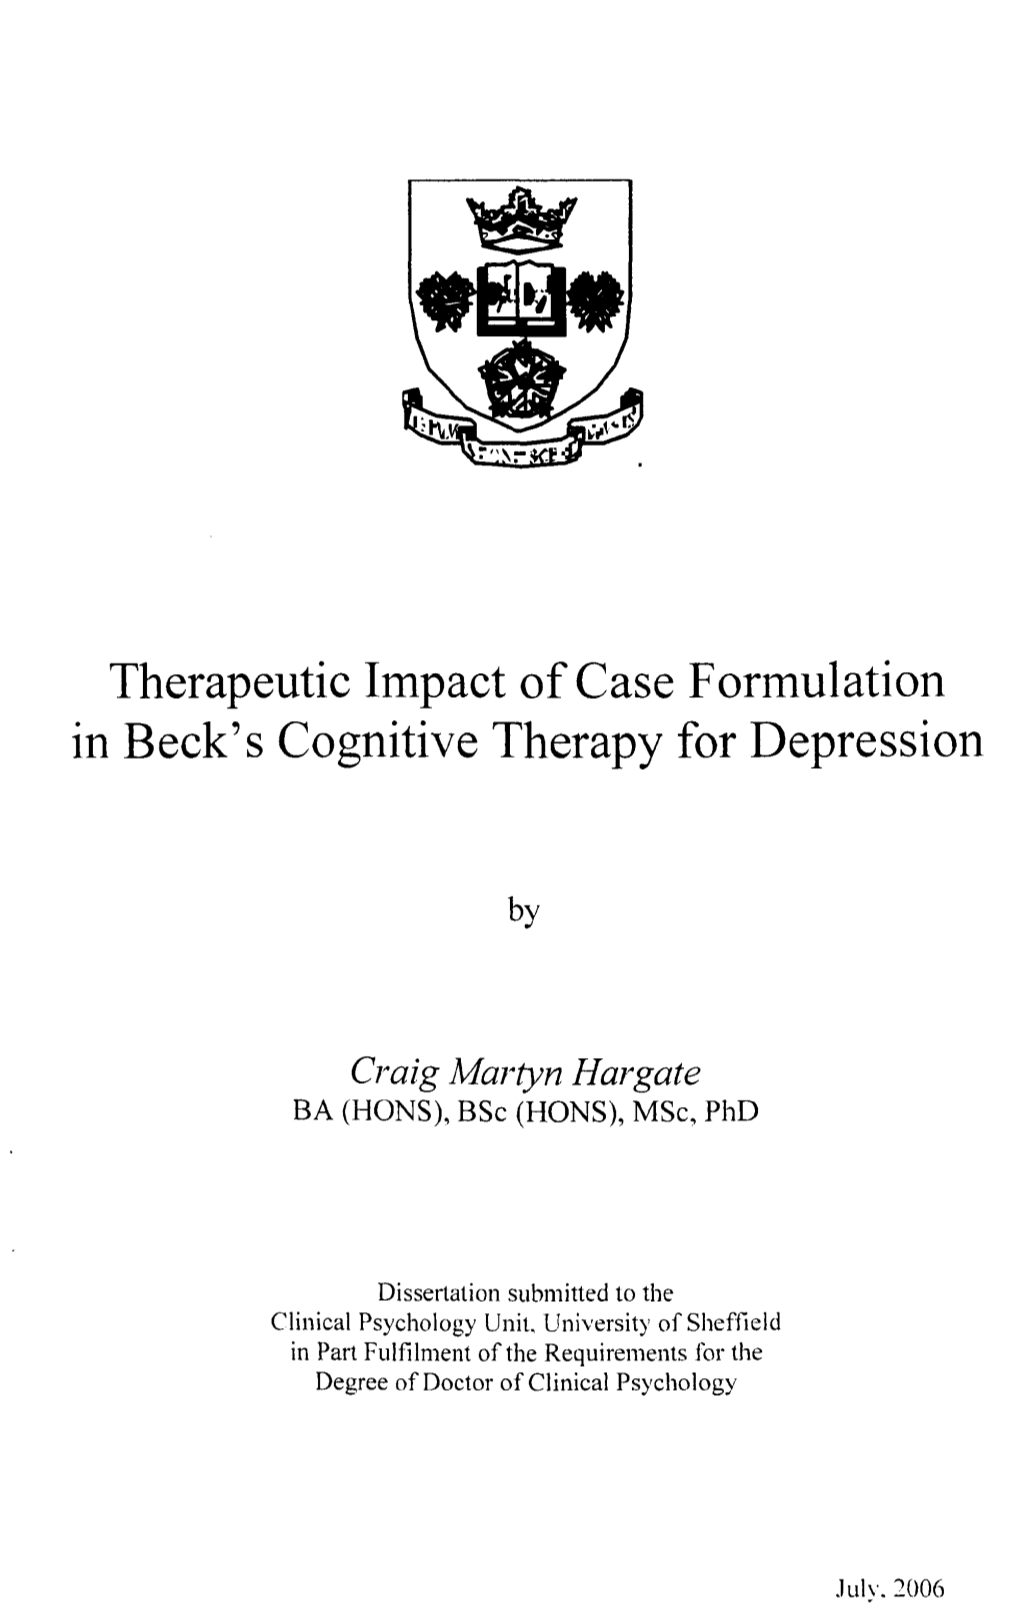 Therapeutic Impact of Case Formulation in Beck's Cognitive Therapy for Depression